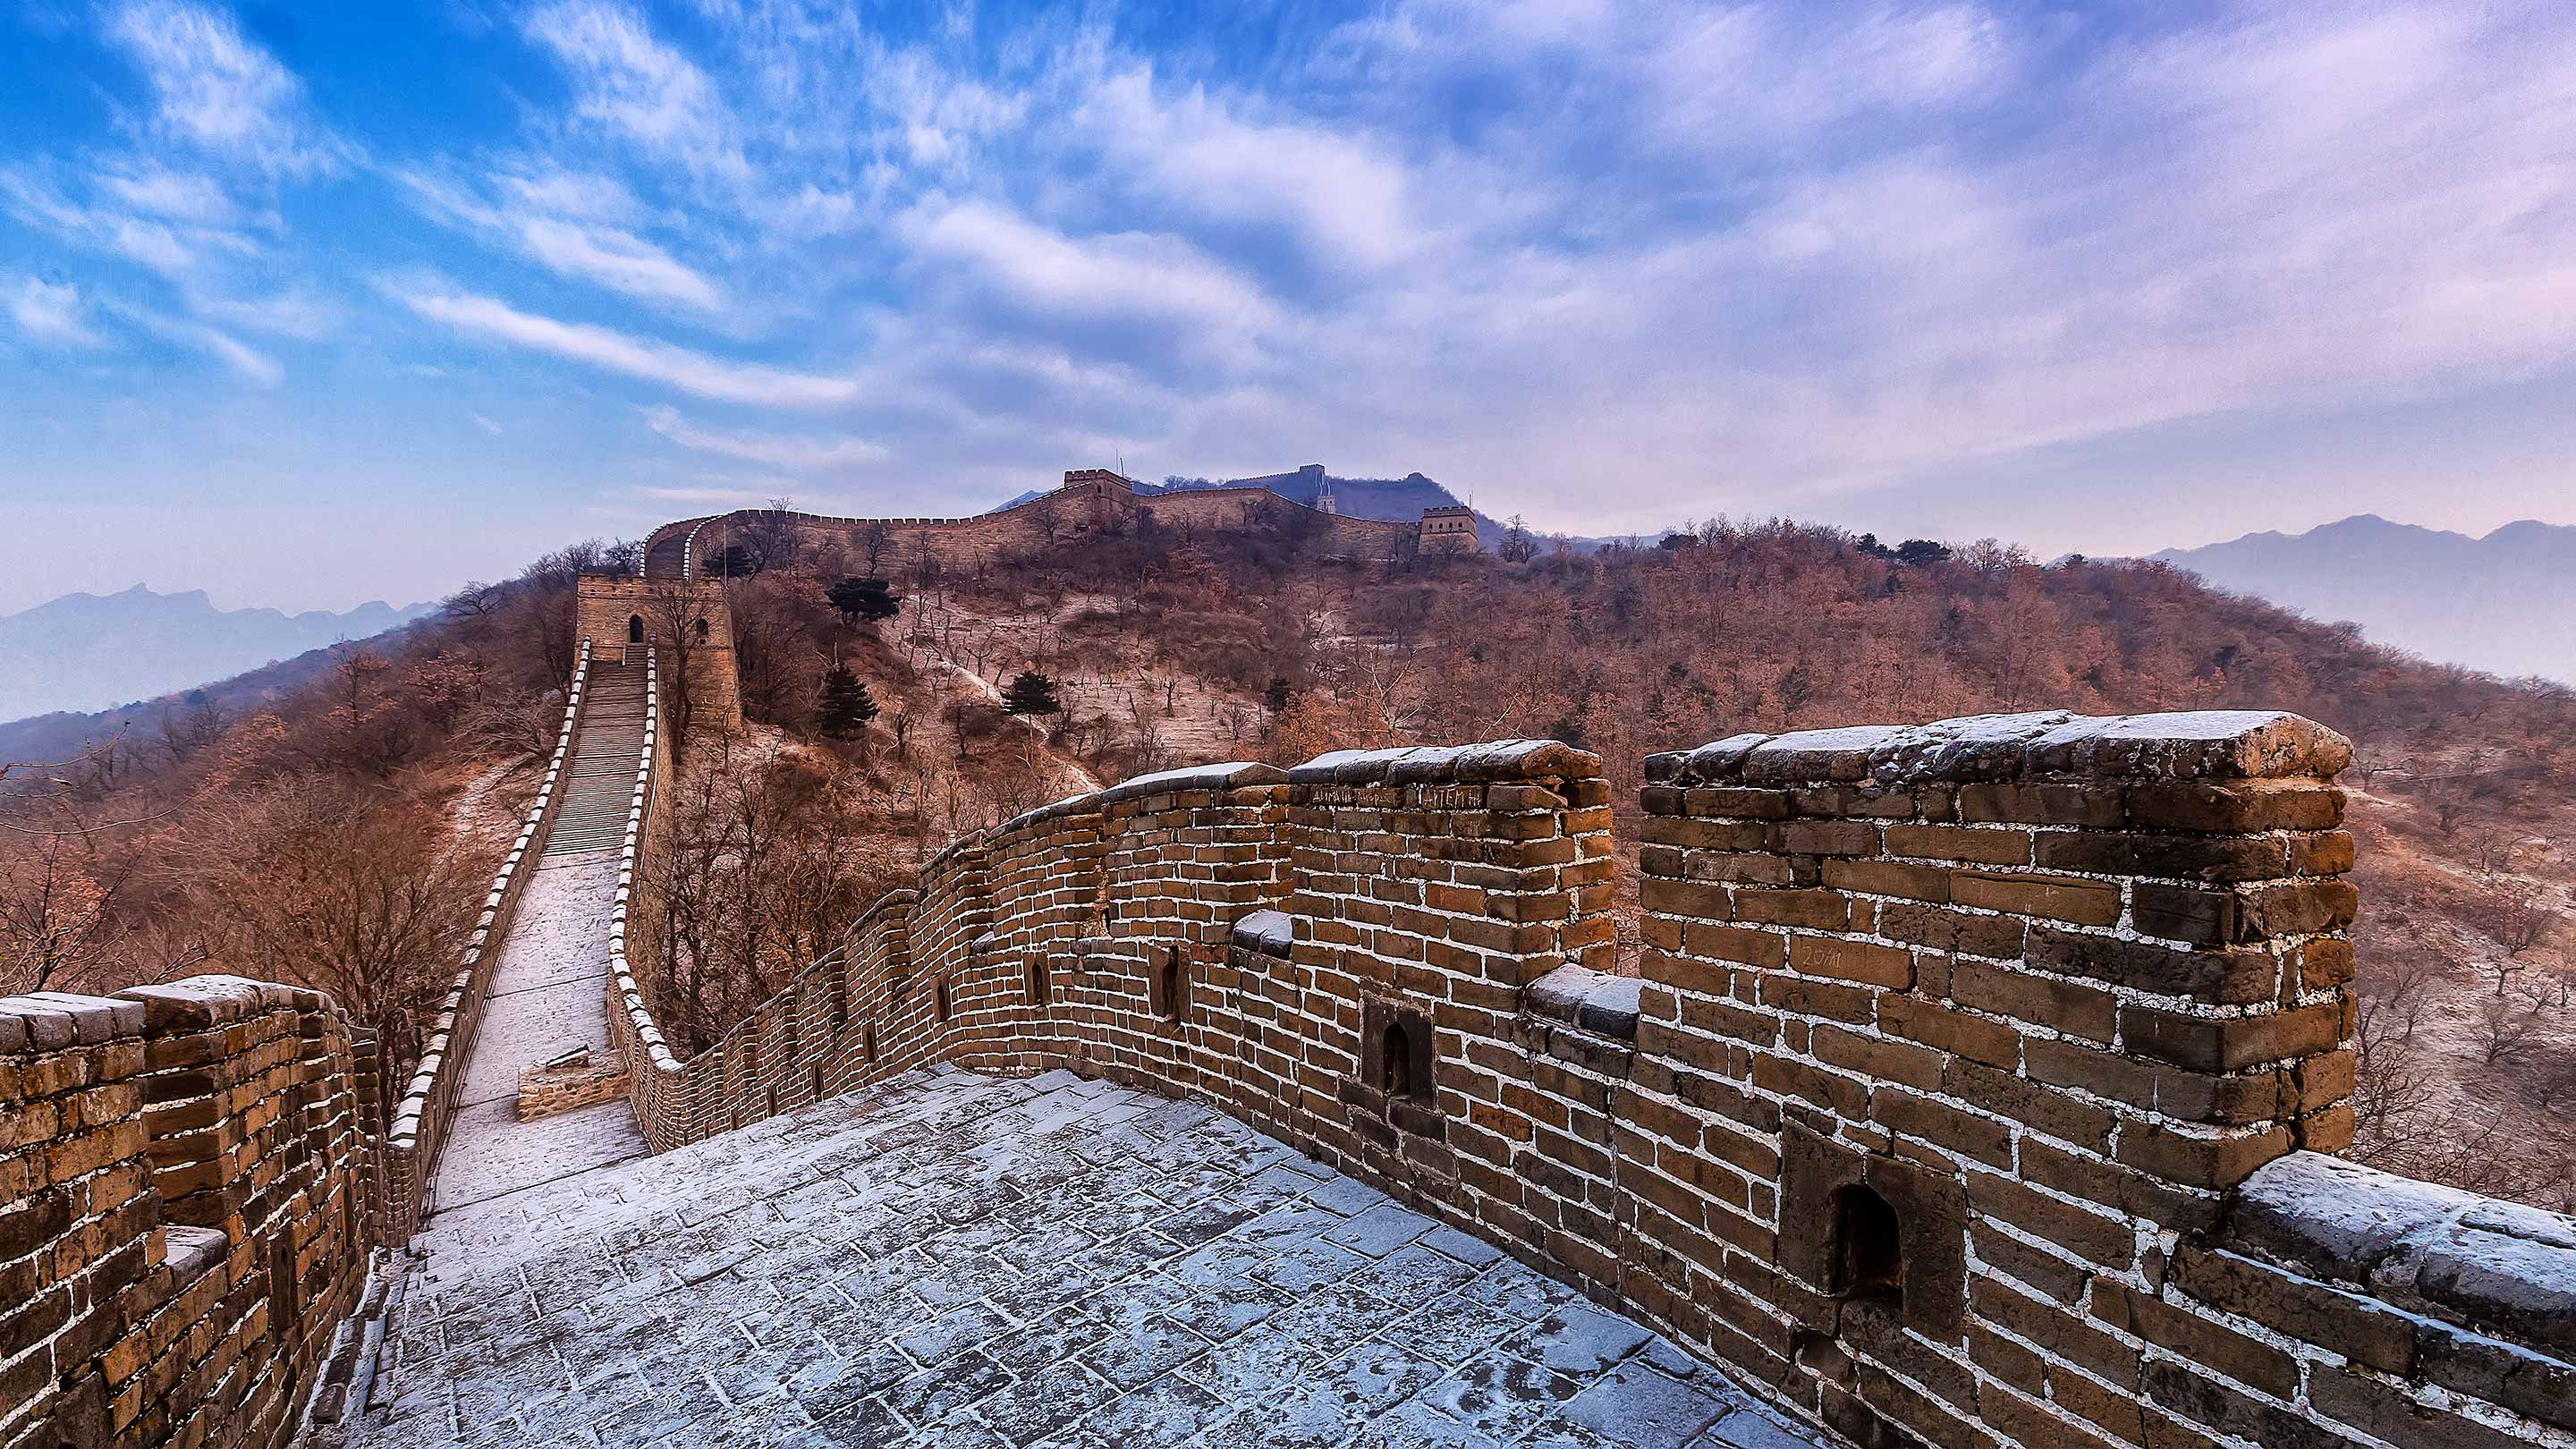 How far is the great wall of china from beijing Beijing Photography Workshops Paul Reiffer Photographer